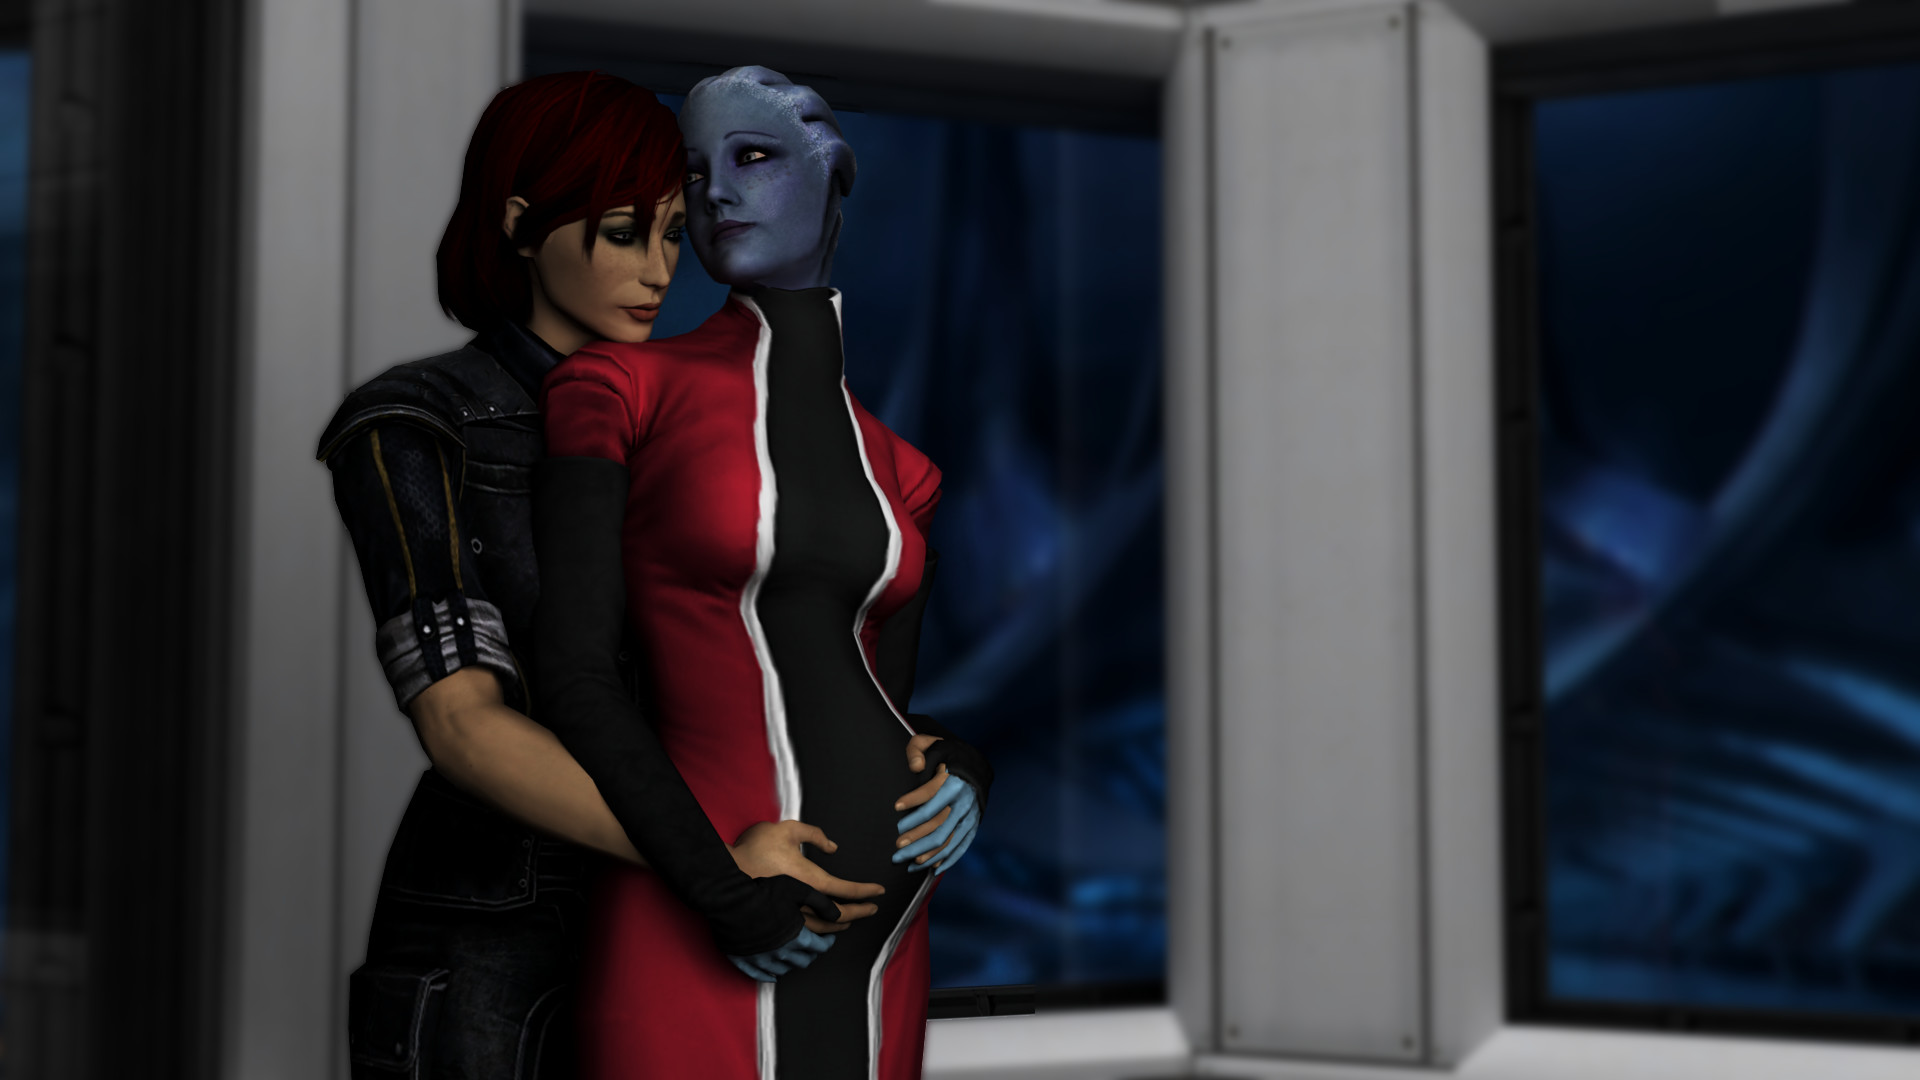 1920x1080 ... A Shepard and Liara legacy by neehs